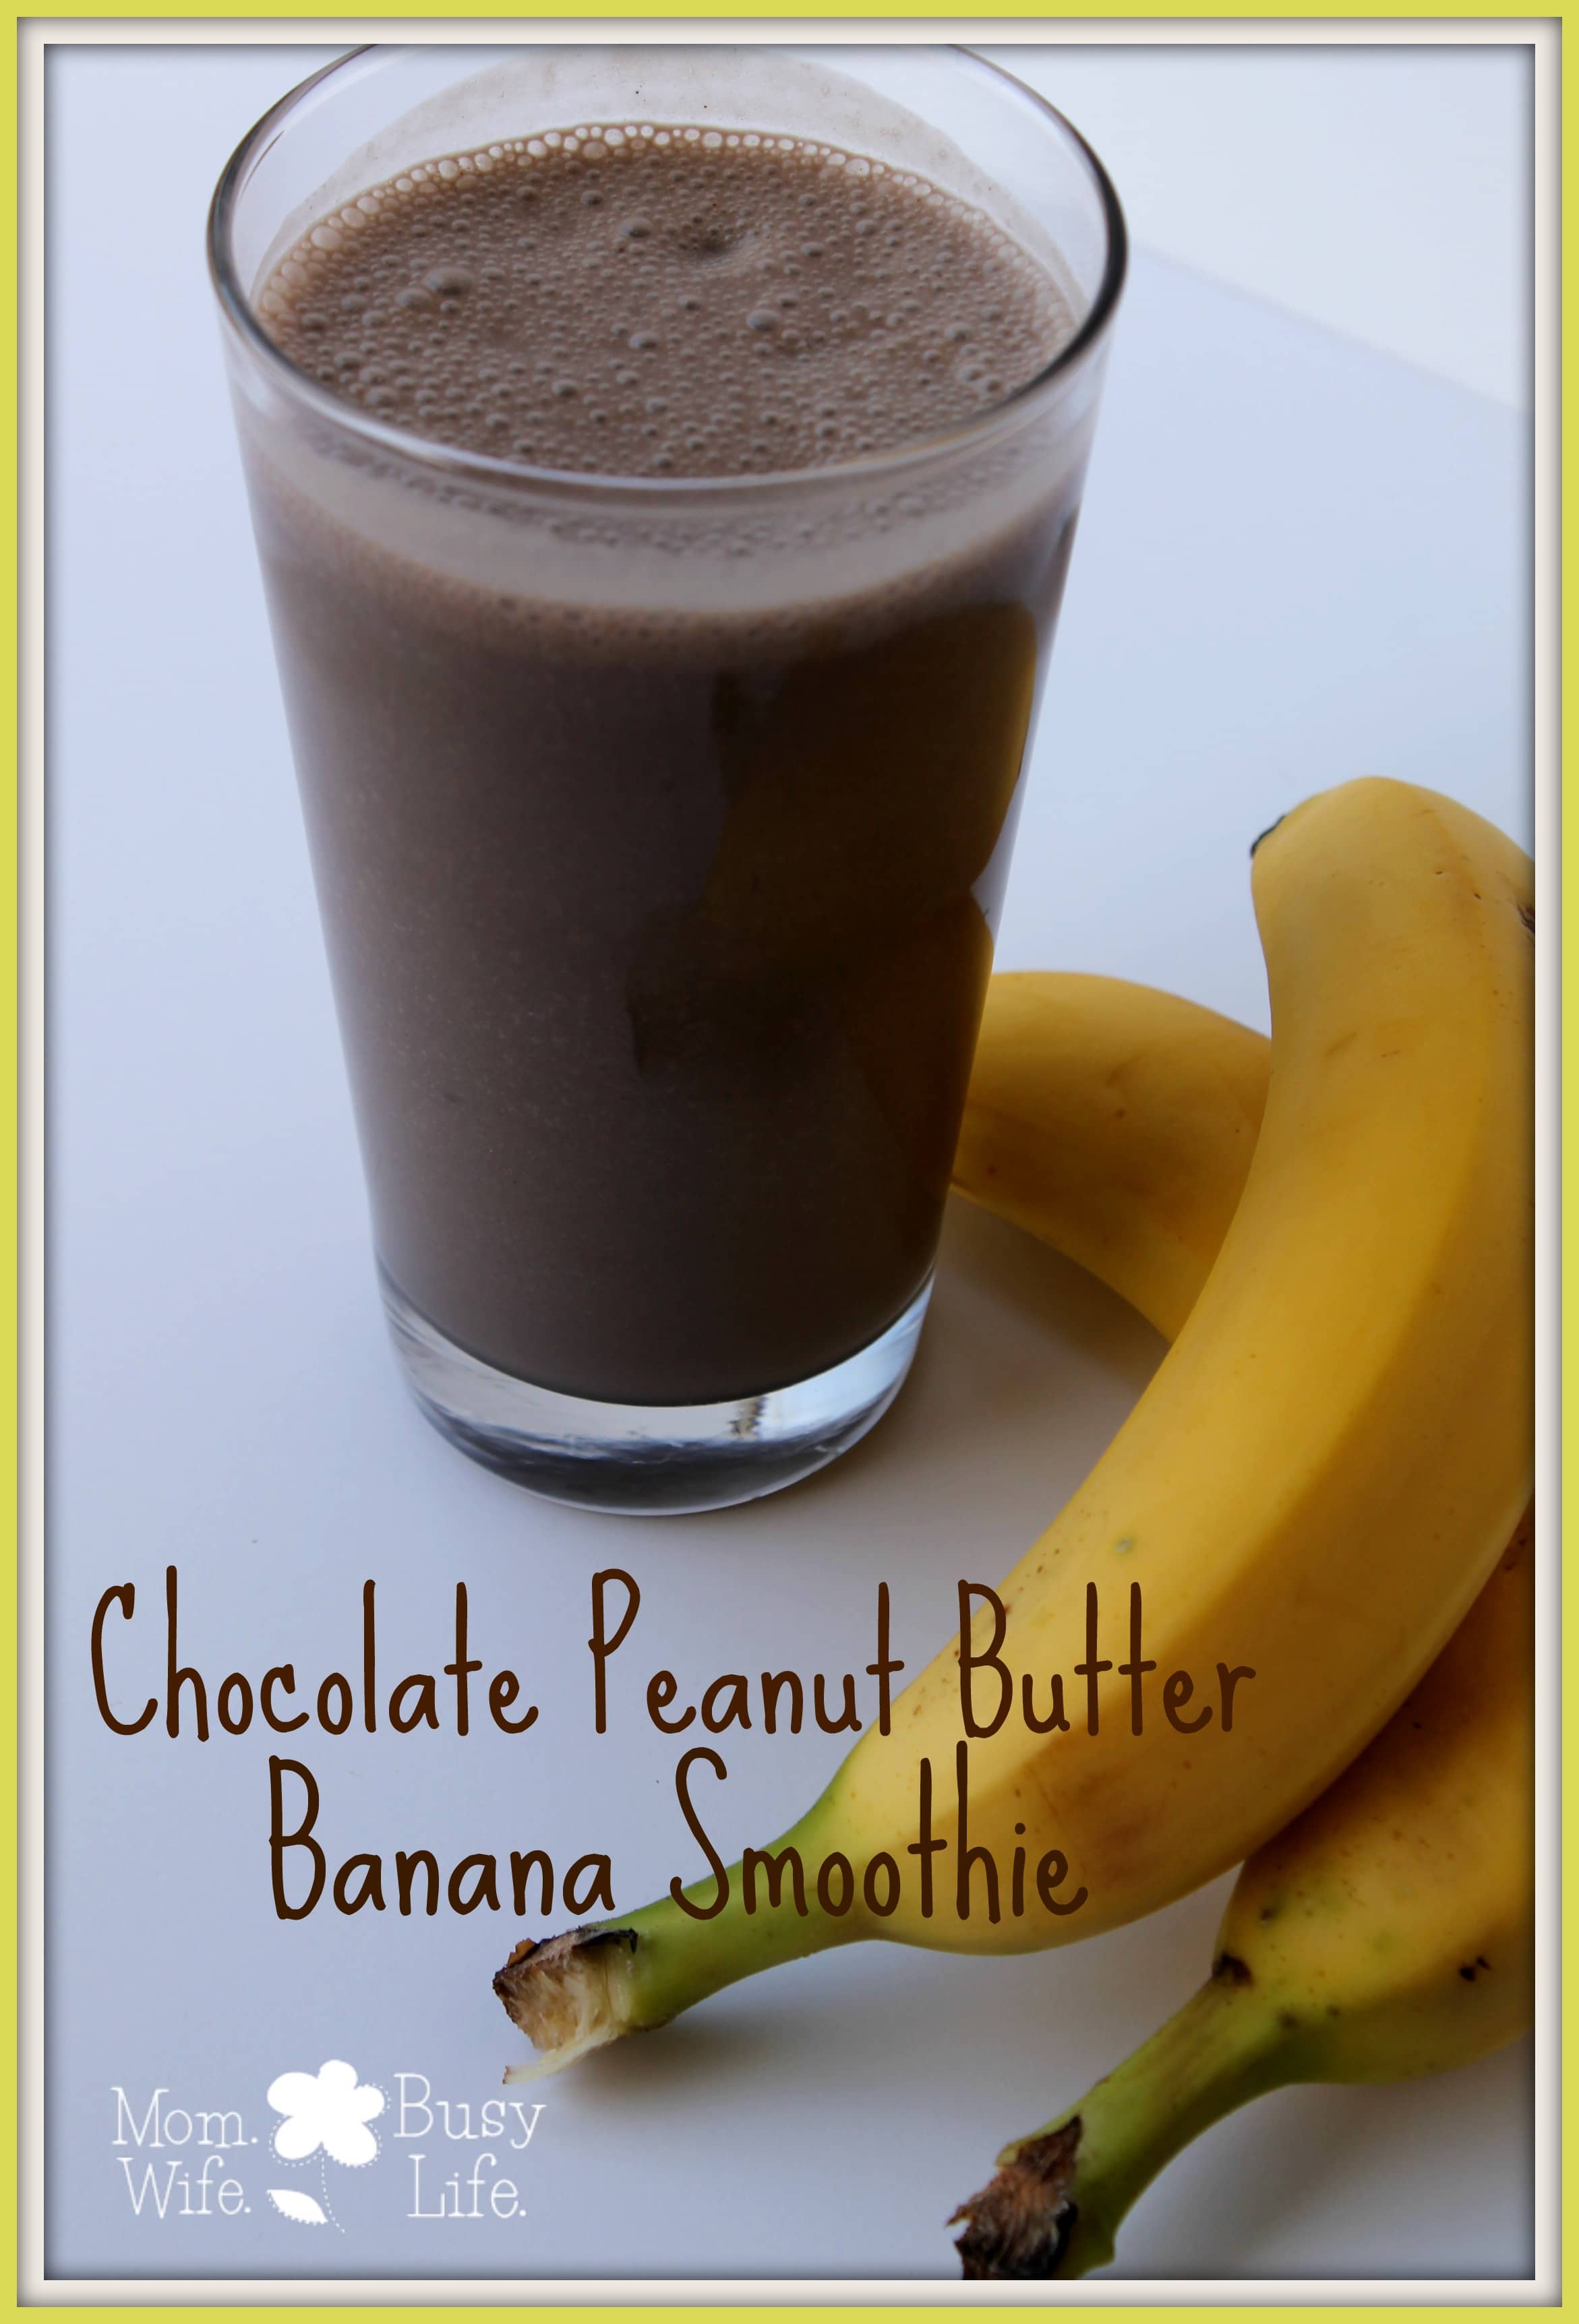 Chocolate Peanut Butter Banana Smoothie